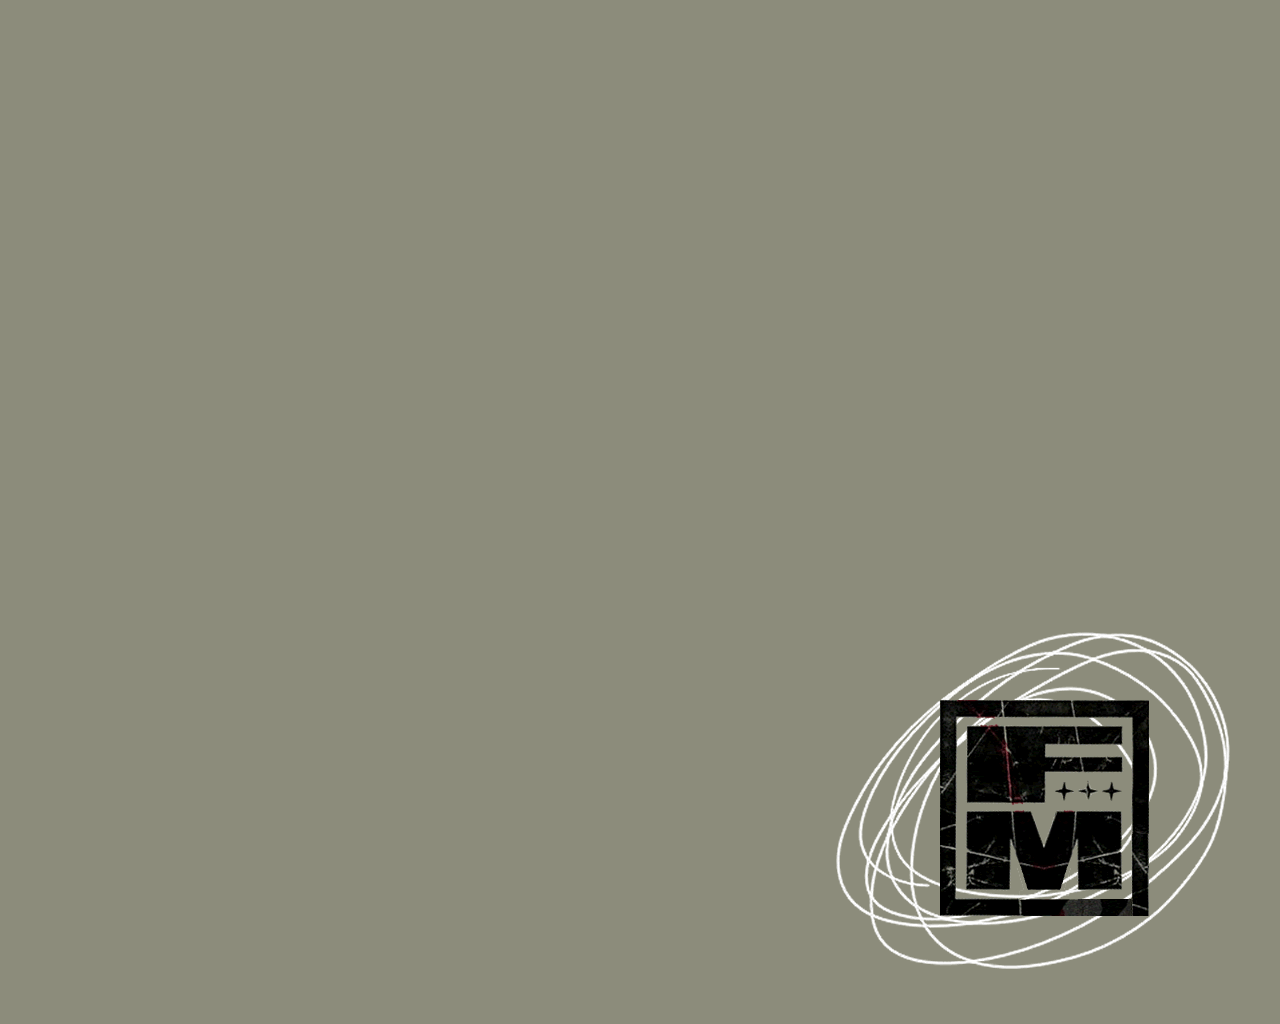 All Fort Minor Background Image Pics Ments